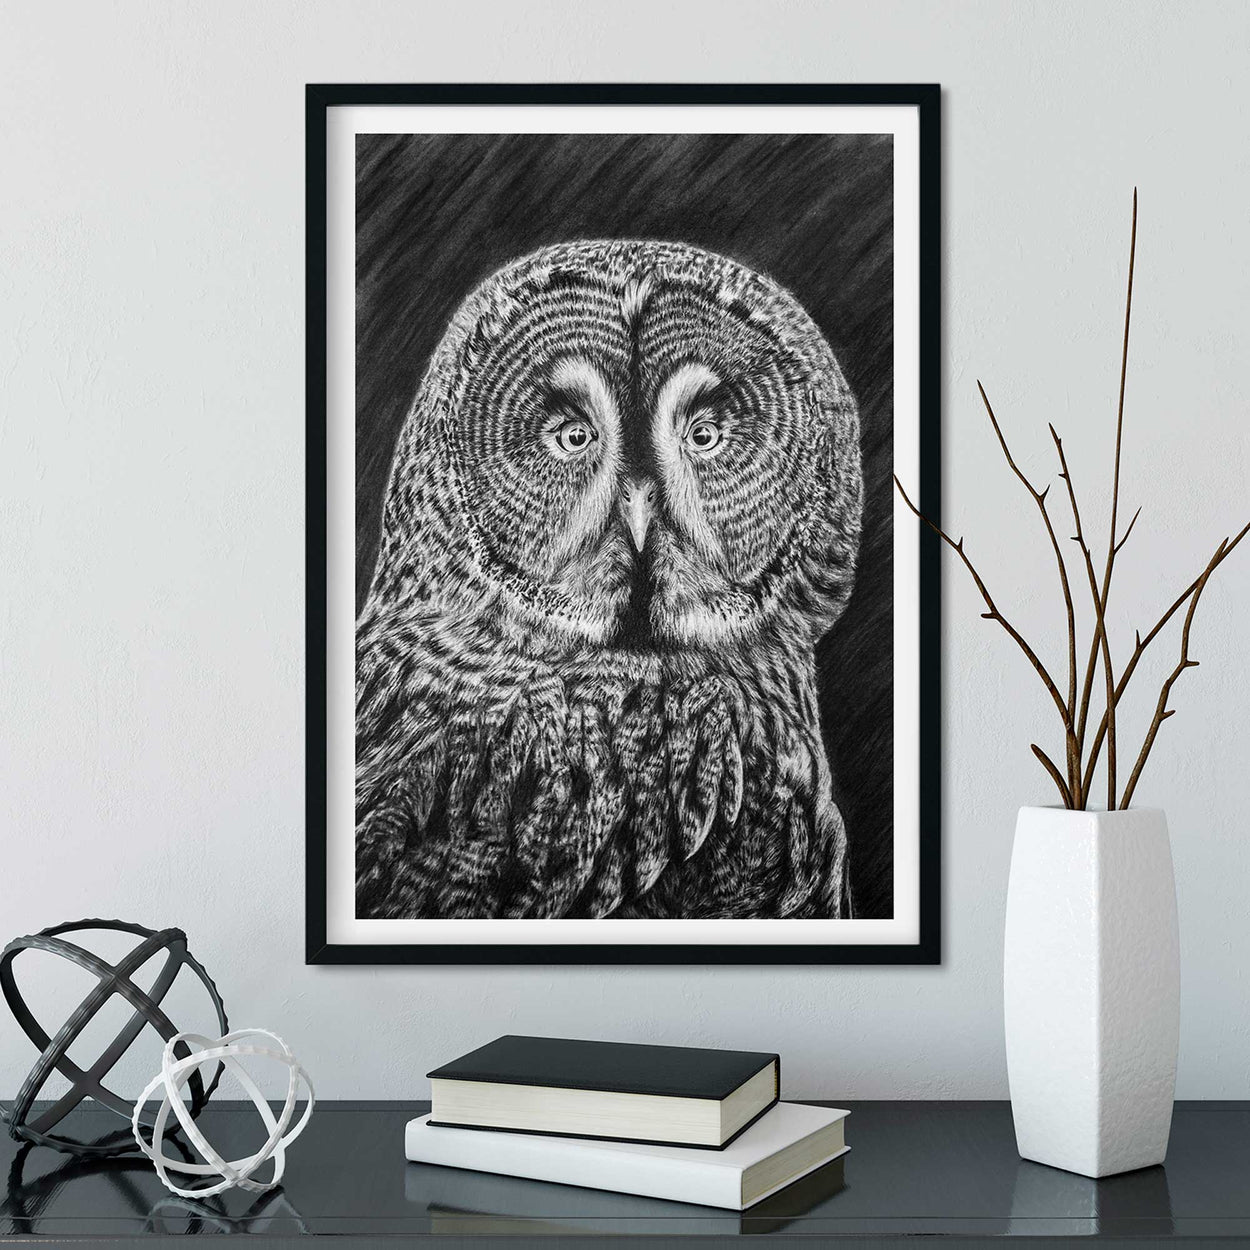 Frame on wall containing black and white drawing of a great grey owl.  Desk below with books and ornaments on it